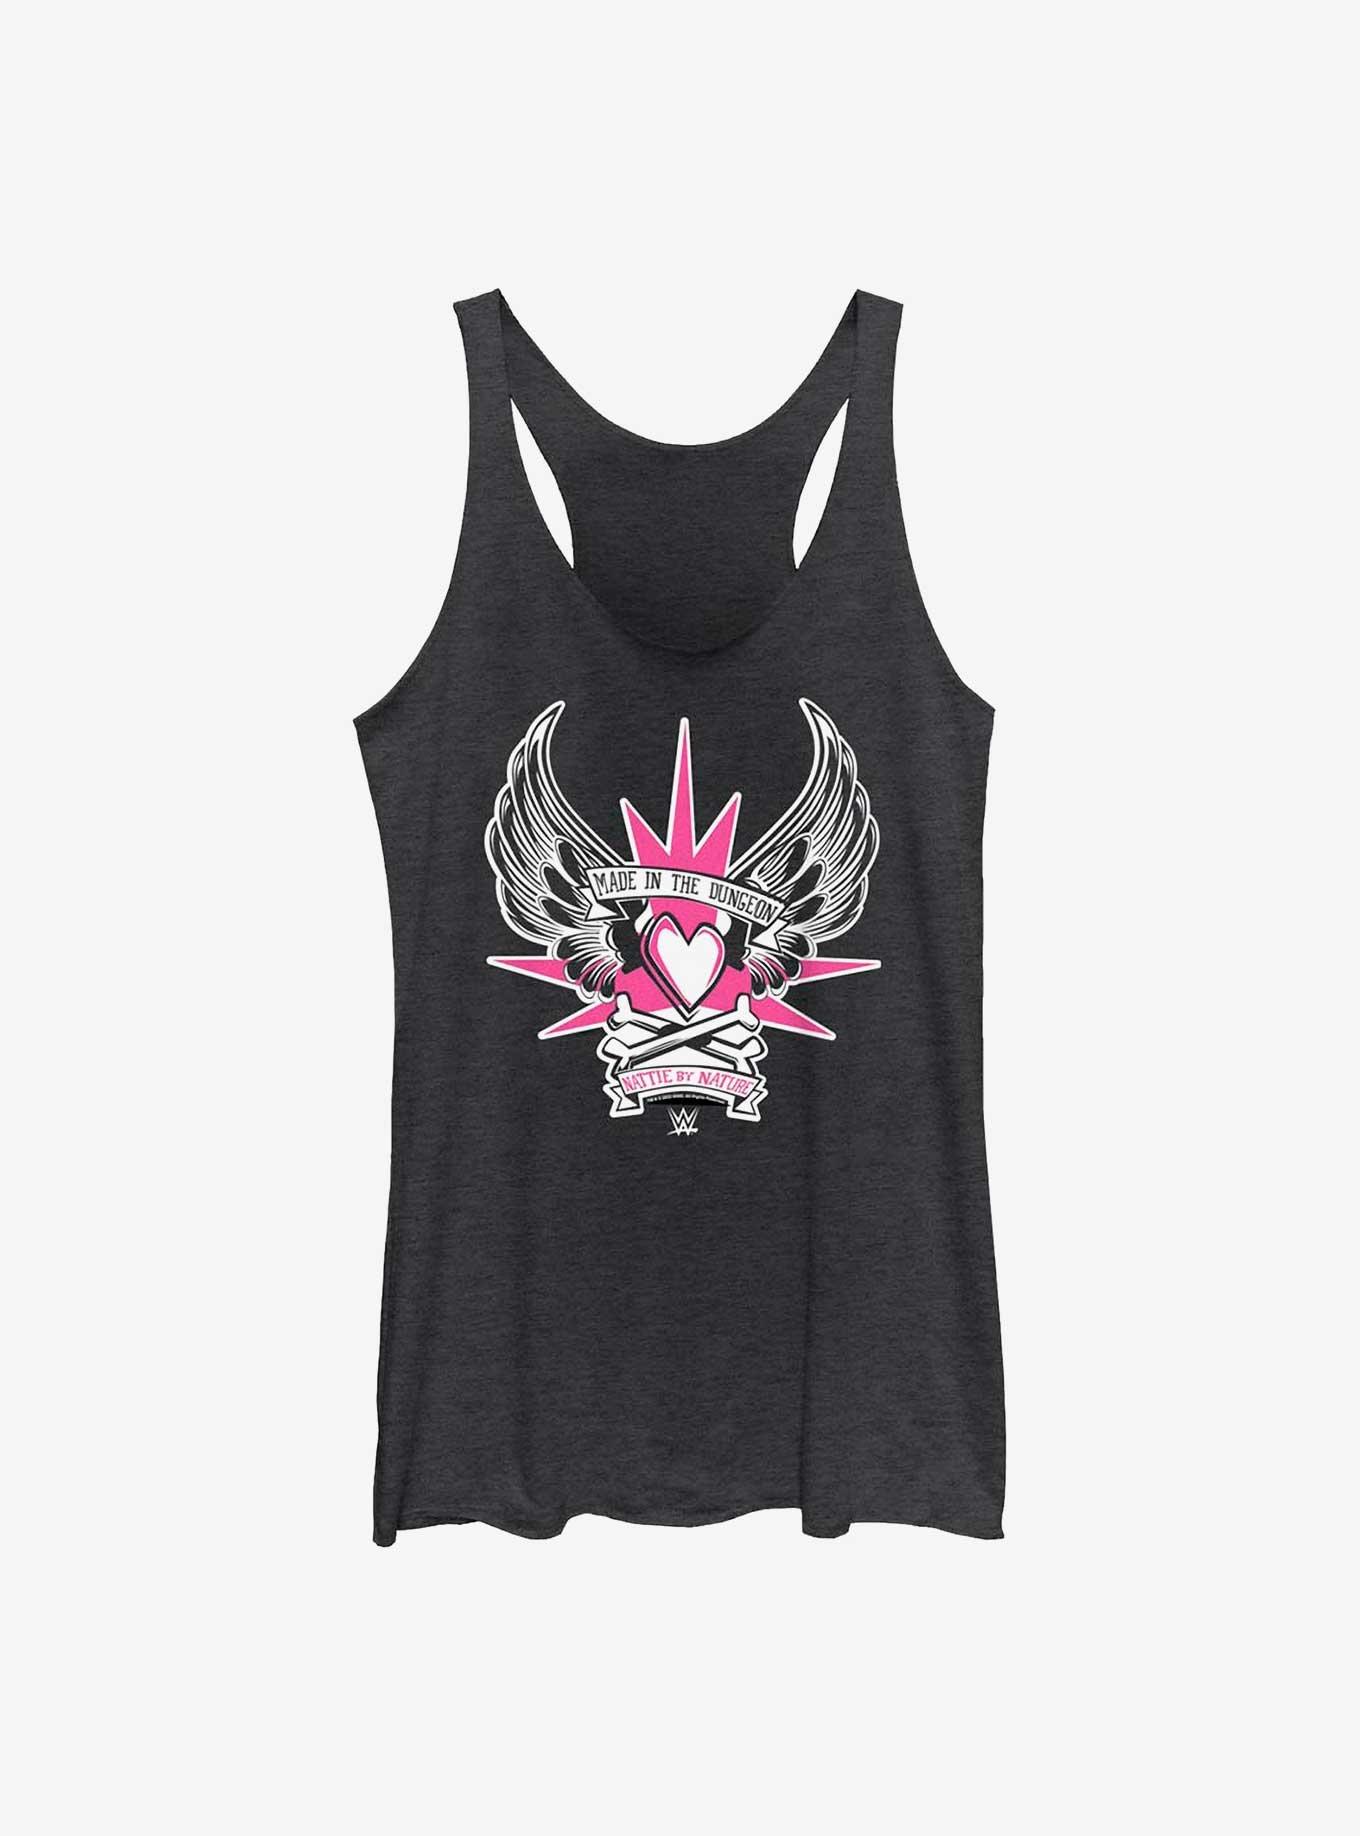 WWE Natalya Nattie By Nature Made In The Dungeon Girls Tank, BLK HTR, hi-res